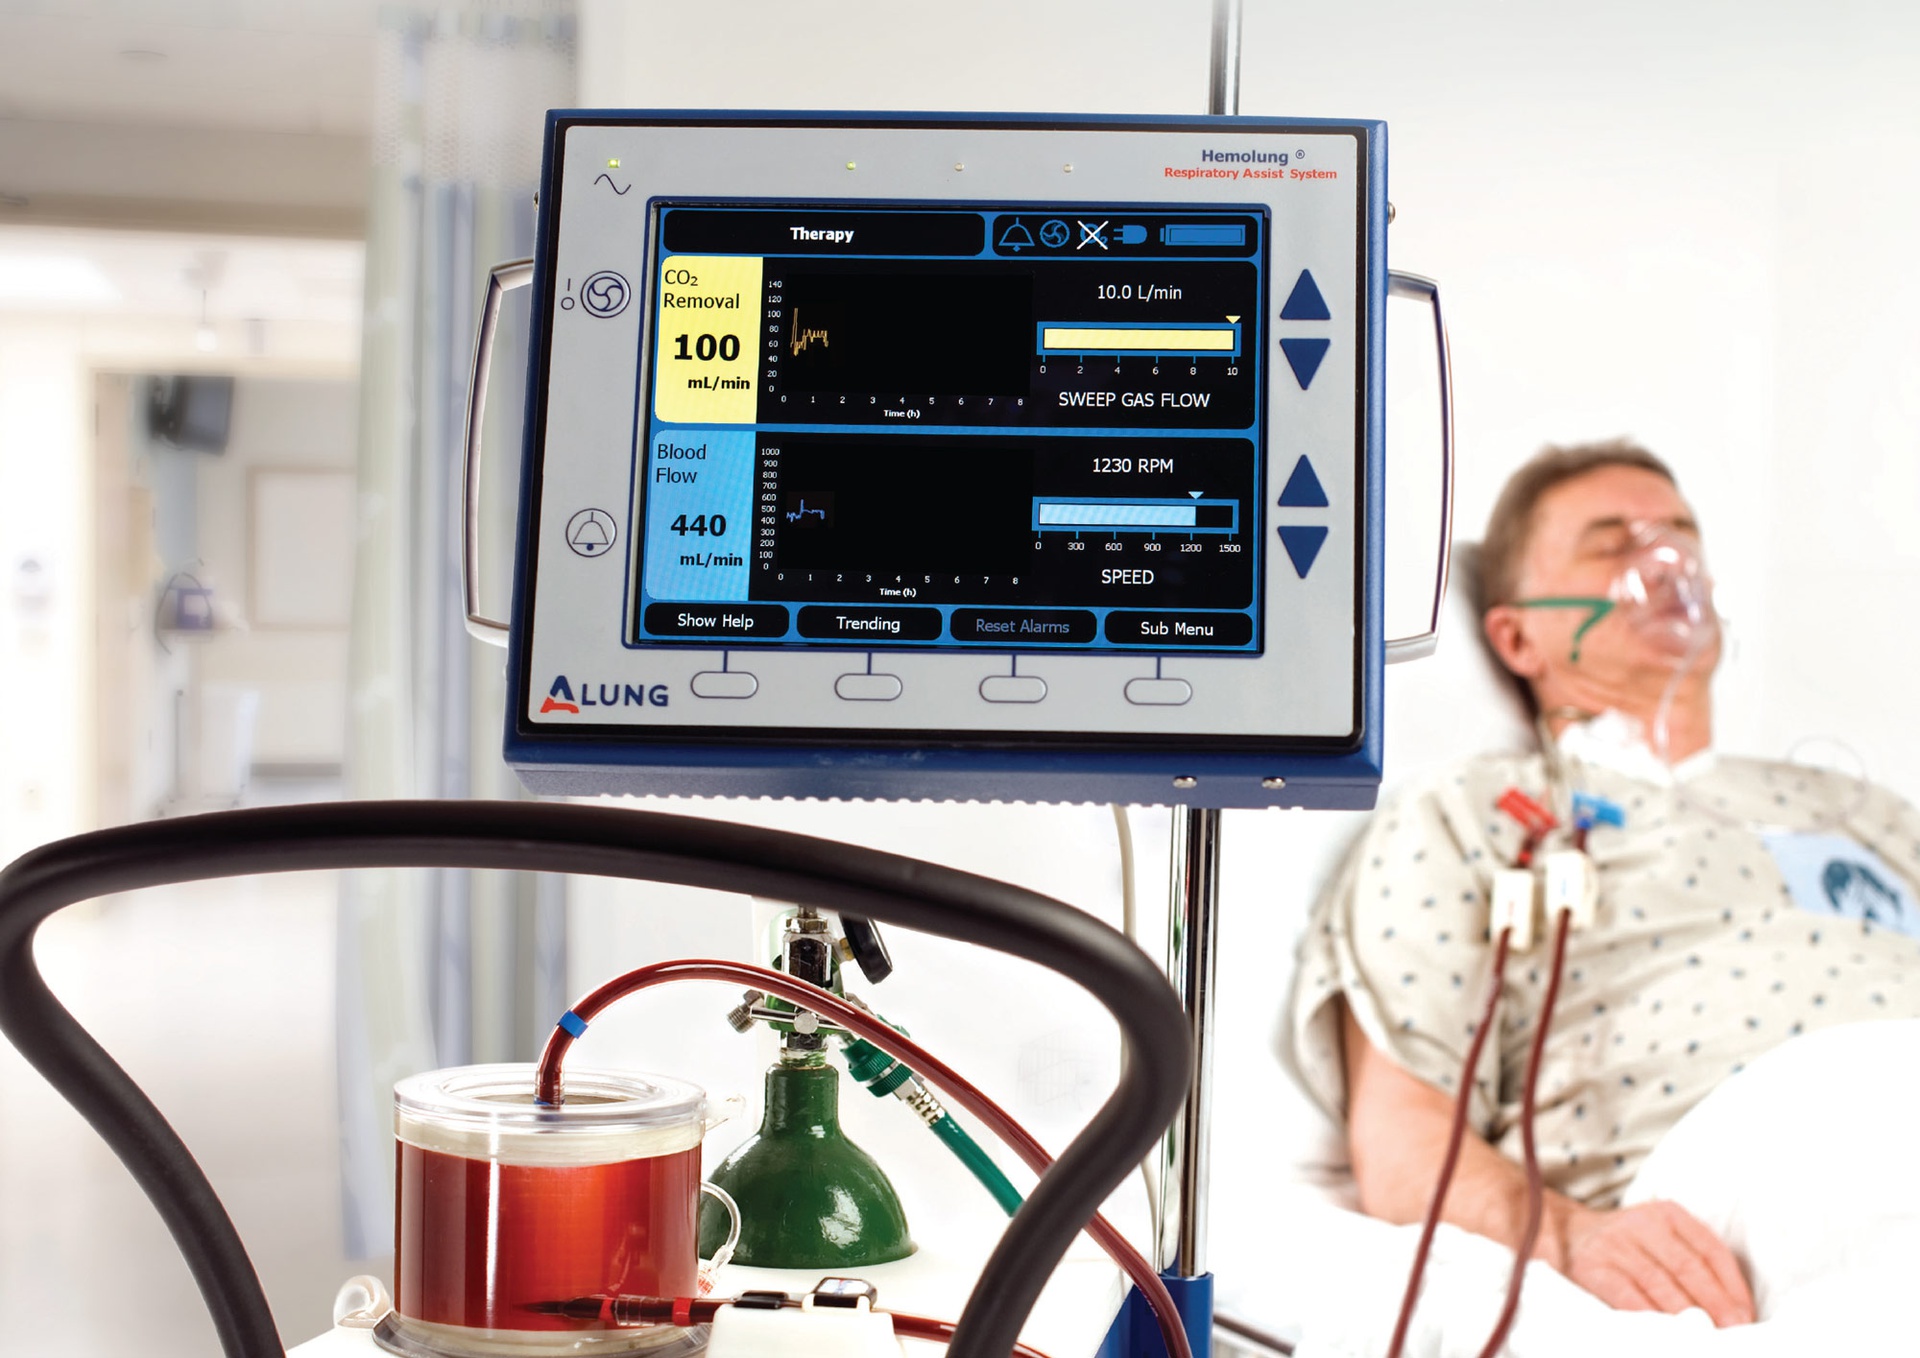 Extracorporeal Carbon Dioxide Removal (ECCO2R) Devices Market